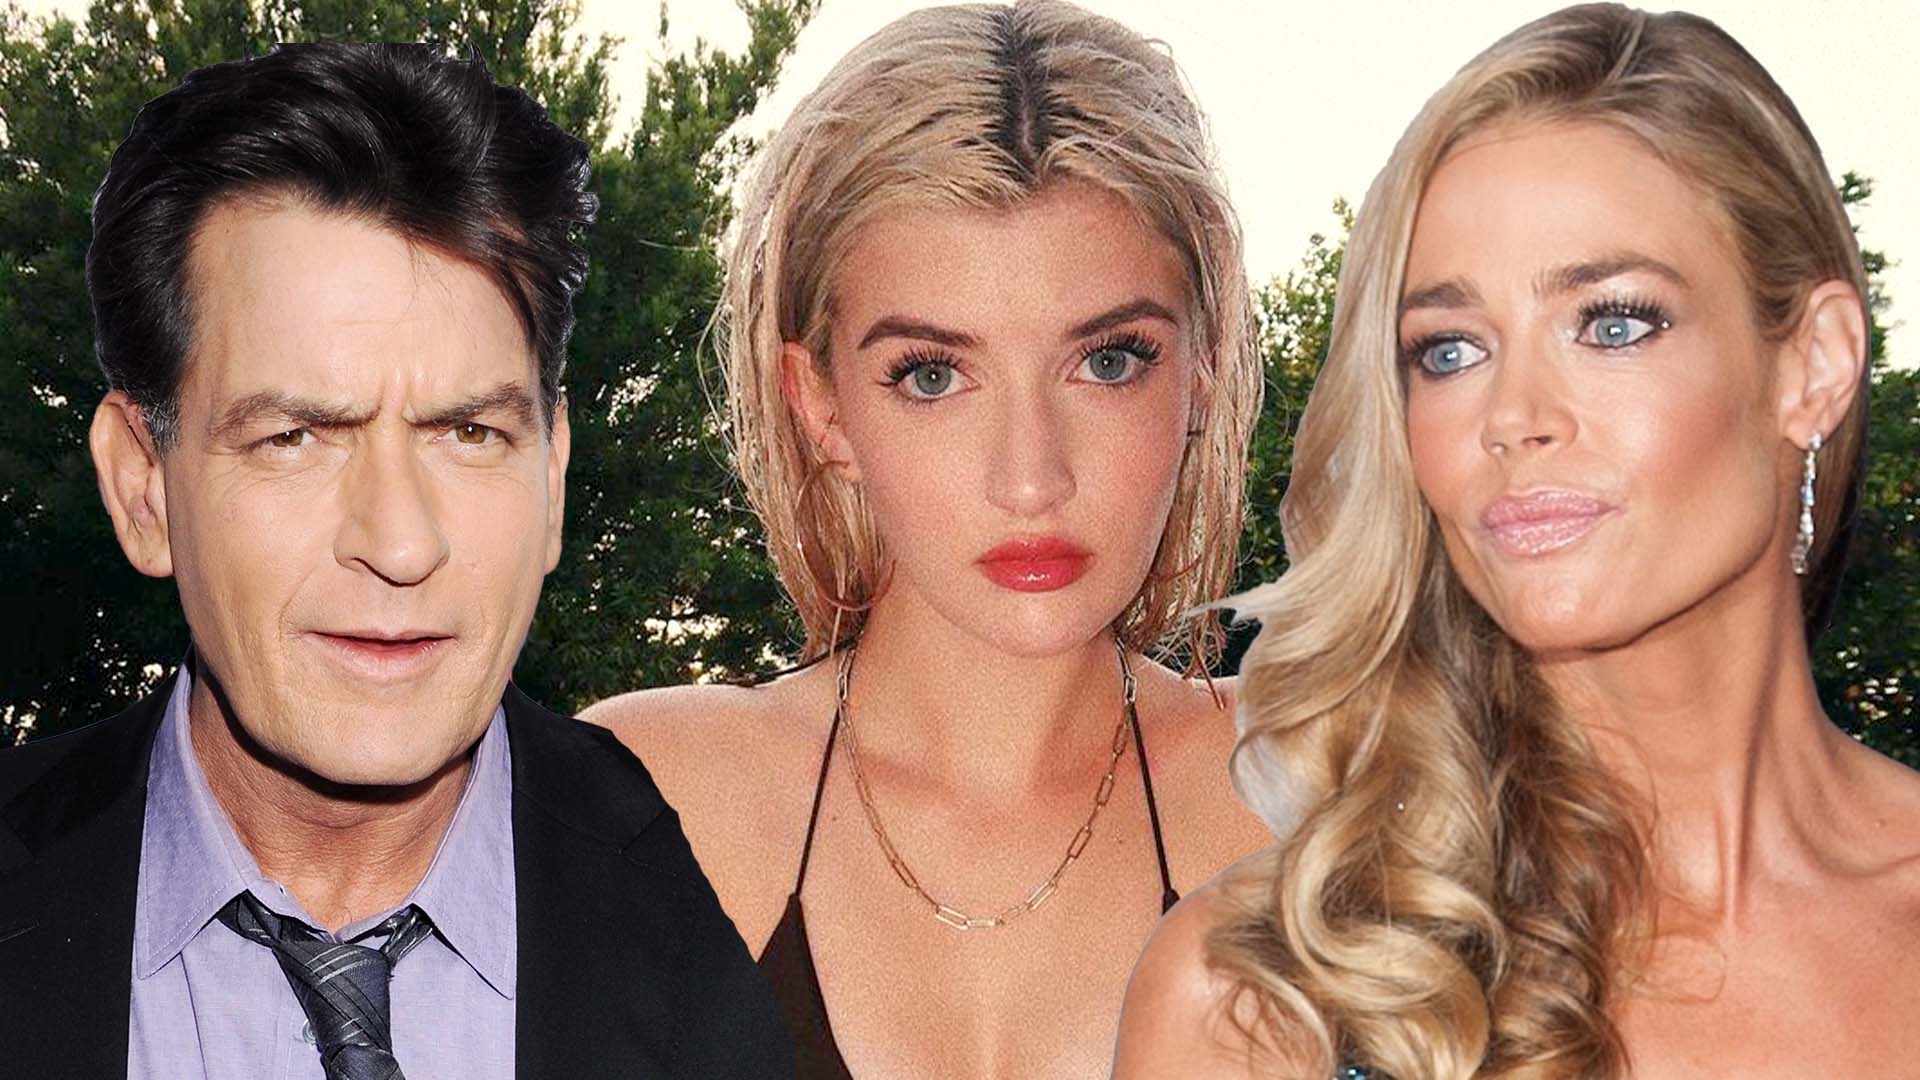 Charlie Sheen and Denise Richards Daughter Sami Shares Her Routine as a Sex Worker Entertainment Tonight